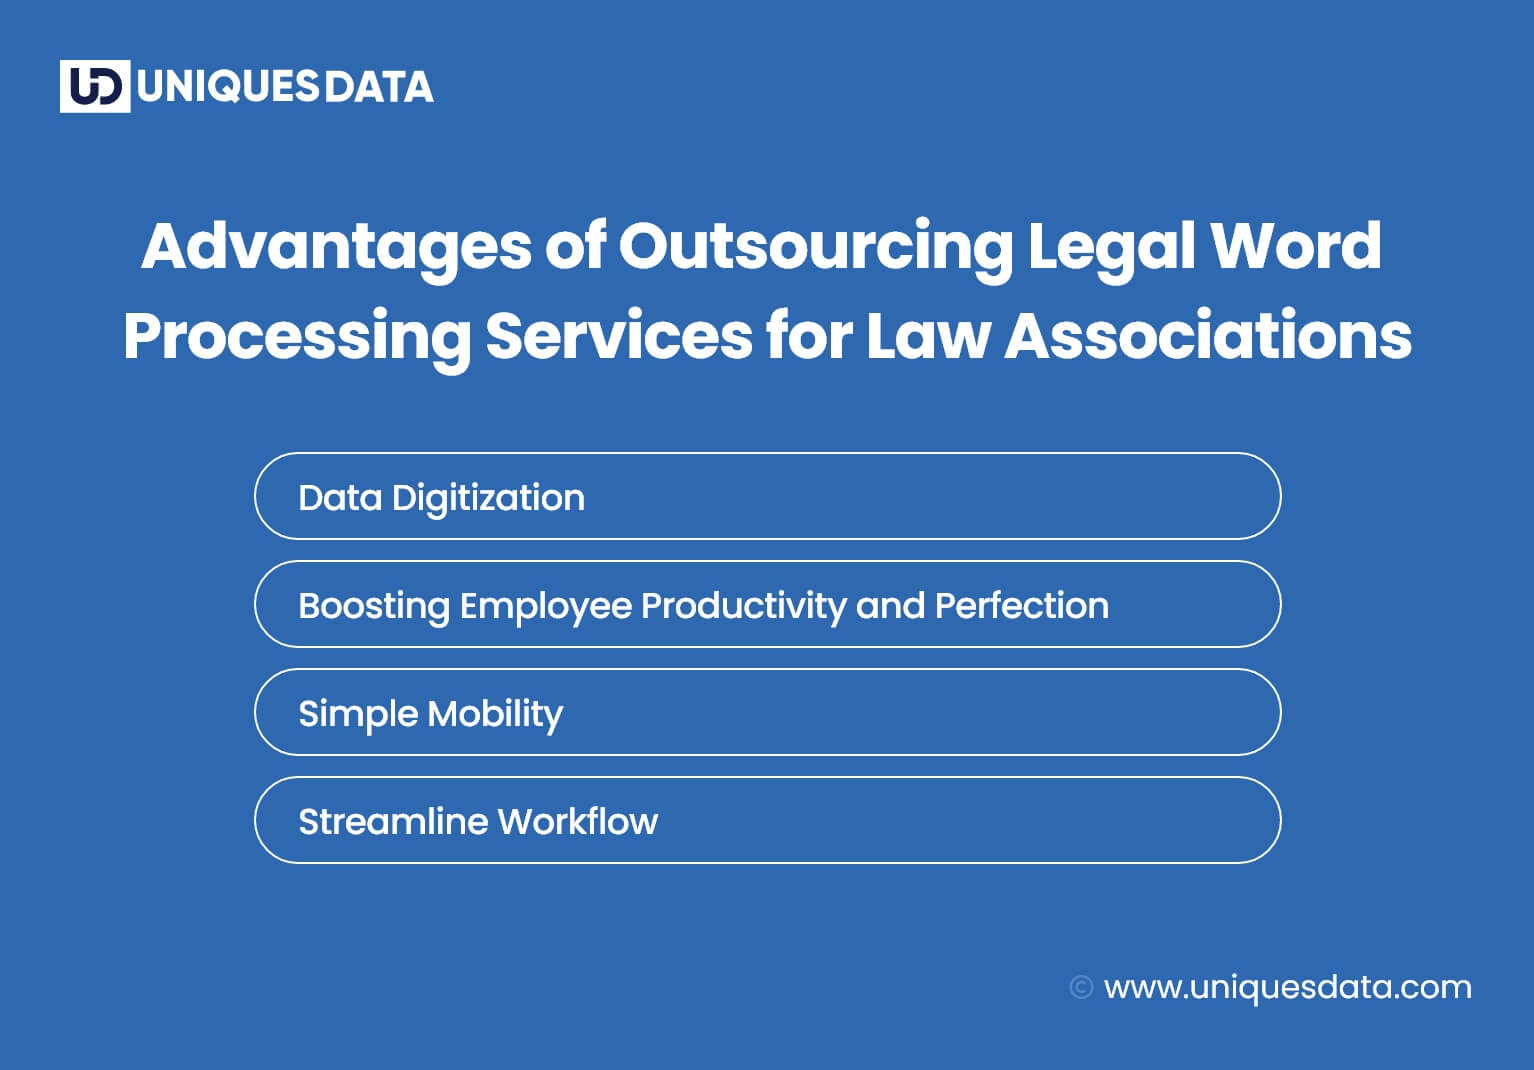 Advantages of Outsourcing Legal Word Processing Services for Law Associations